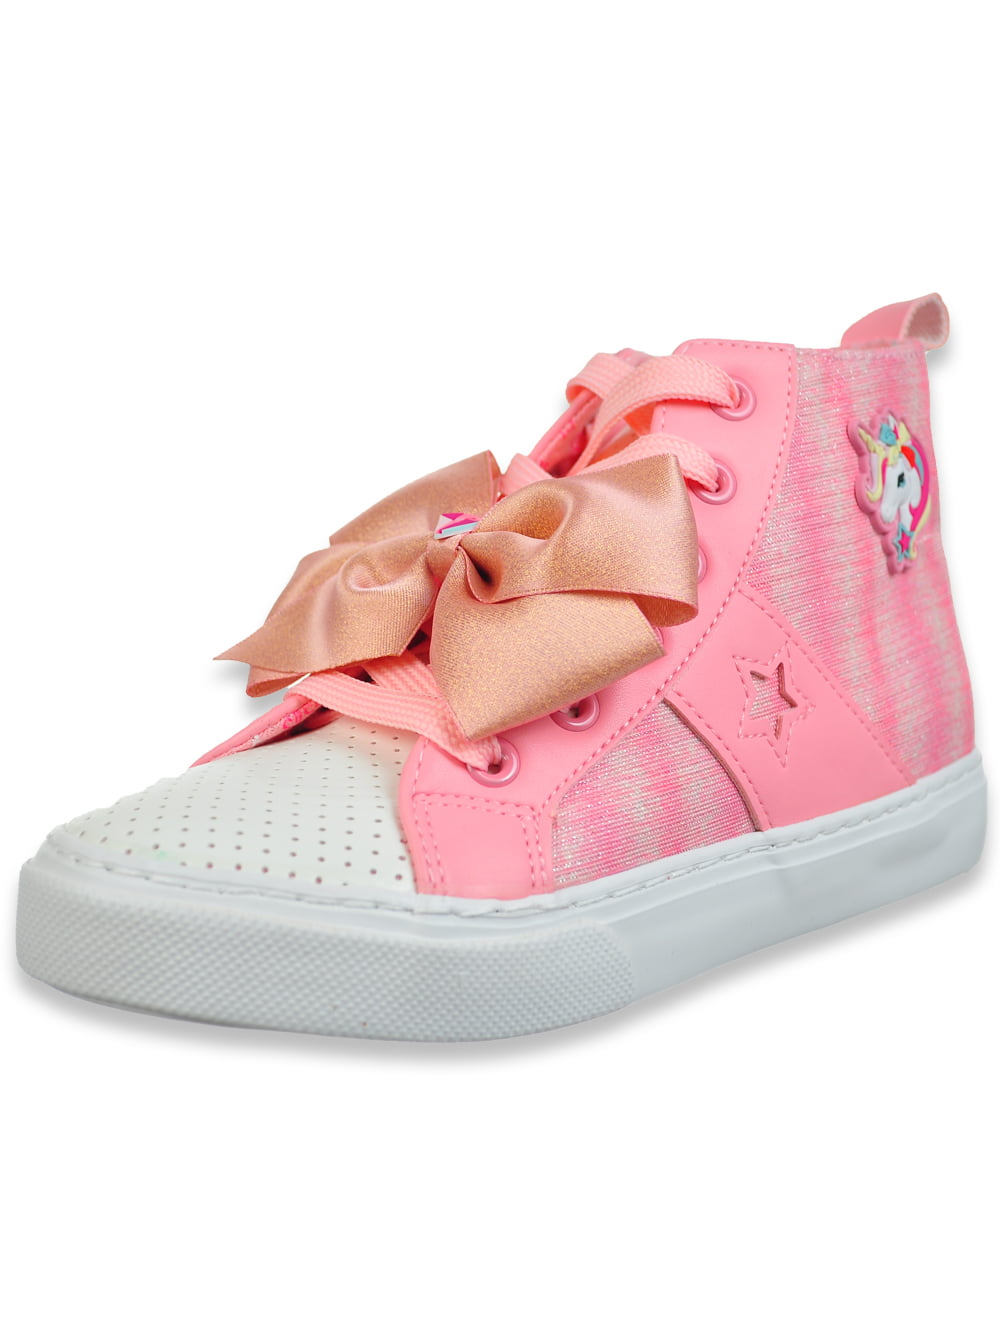 1 Jojo Siwa Girl's Youth Sneakers Bow Shoes Size 13 2 or 3 NEW in Box 